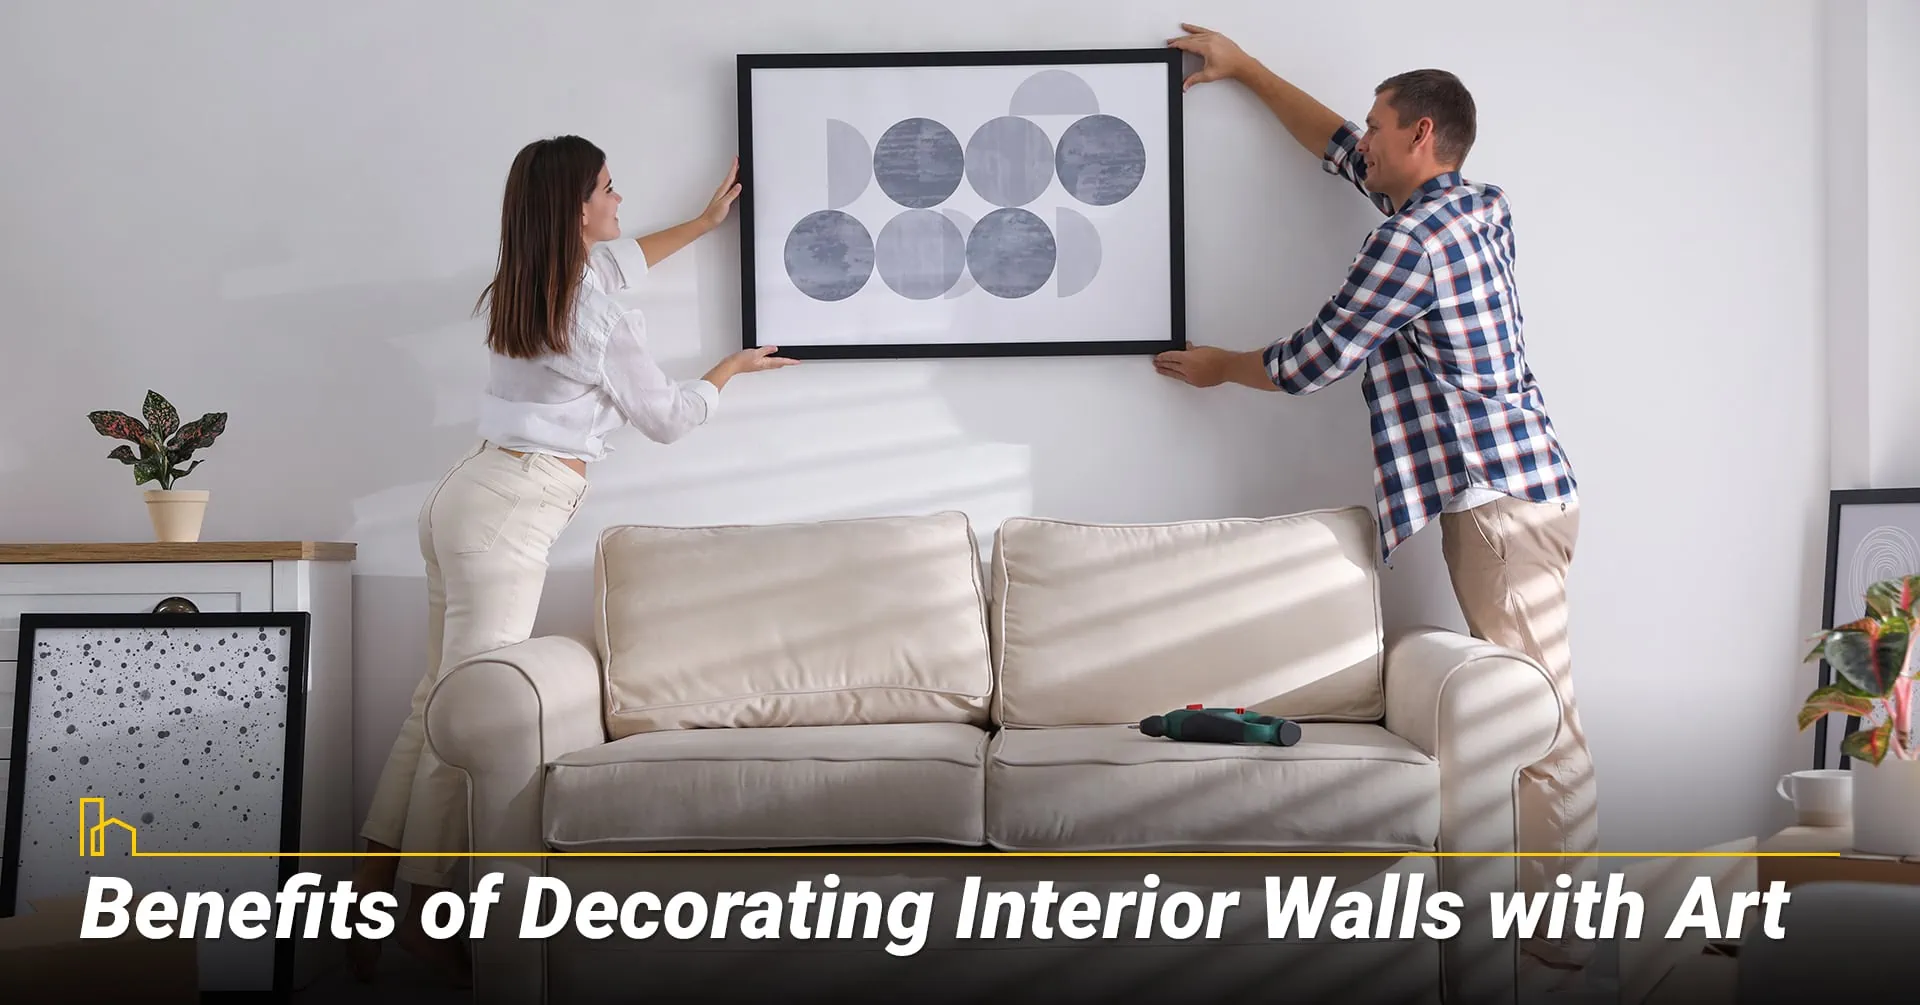 Benefits of Decorating Interior Walls with Art